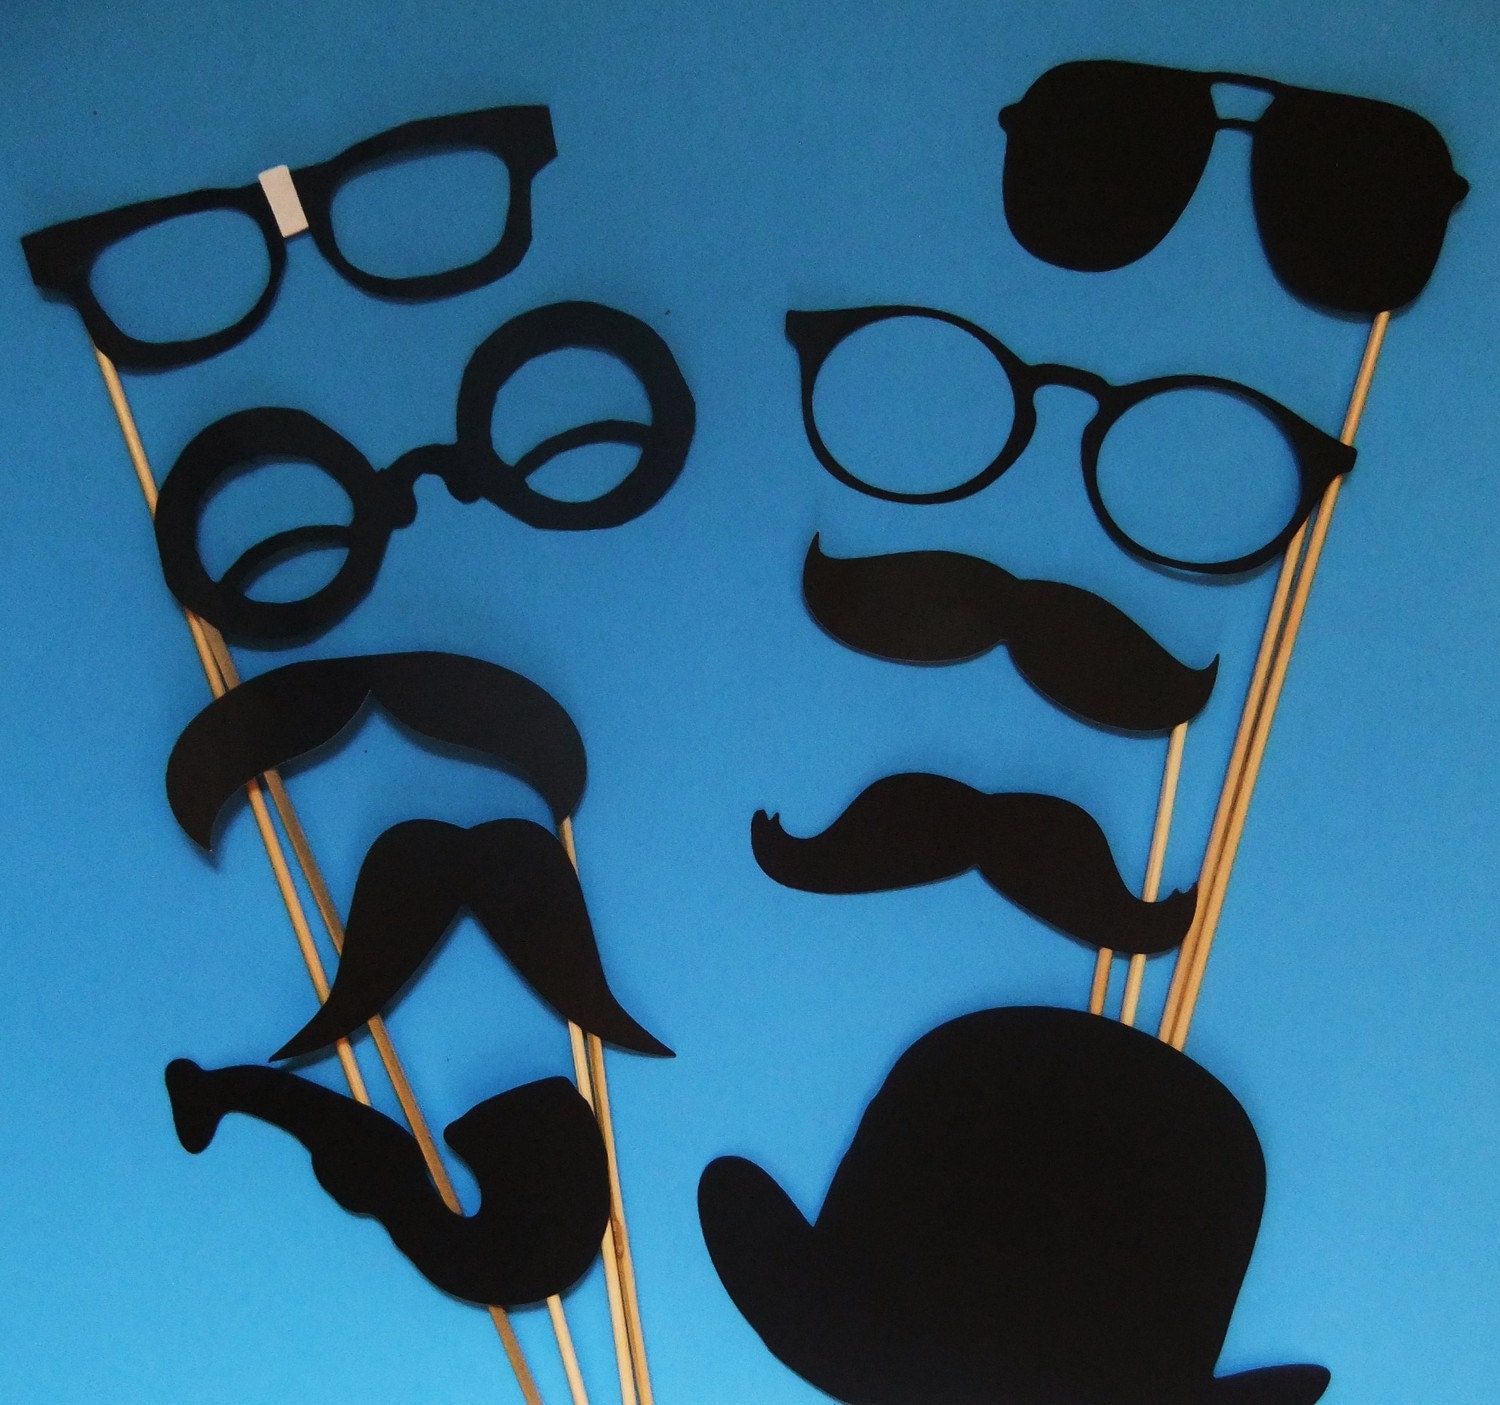 Party Making Memories-Set of 10 Photo Props Unique Funny way to Personalize your photos and create lasting memories  Geek Book worm Pipe Hat mustache Black Elegance Wedding Birthday Party Shower Graduation Family Renuinon Meeting Themed party props wp